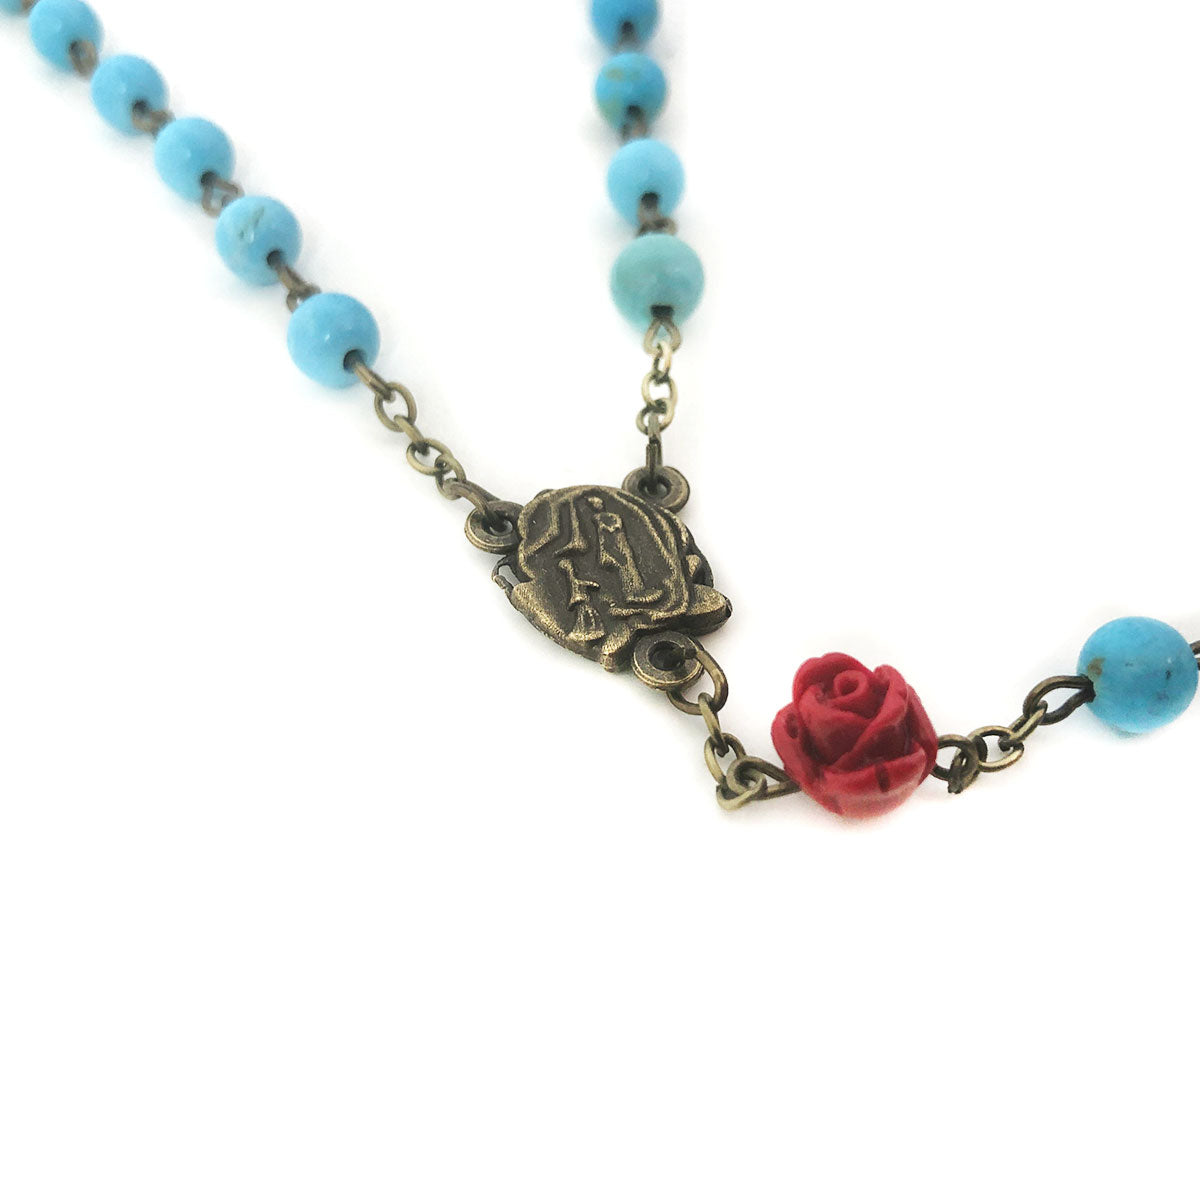 Our Lady of Lourdes Turquoise and Red Rose Rosary and Rosary Bracelet Set by Catholic Heirlooms